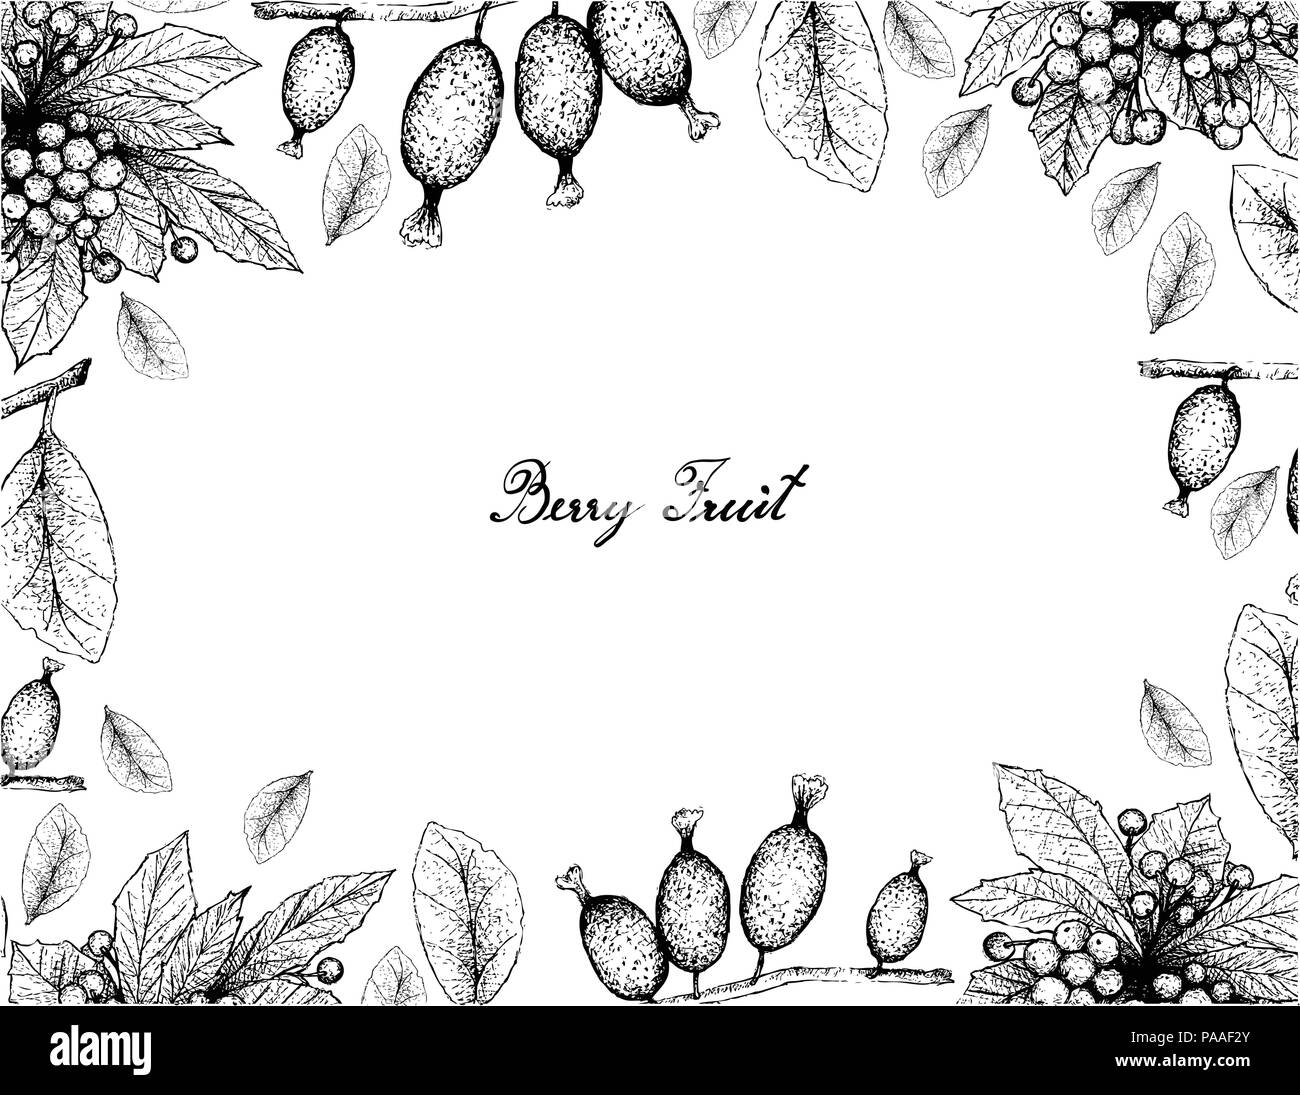 Berry Fruit, Illustration Frame of Hand Drawn Sketch of Christmas Berries or Ardisia Crenata and Elaeagnus Latifolia Fruits Isolated on White Backgrou Stock Vector